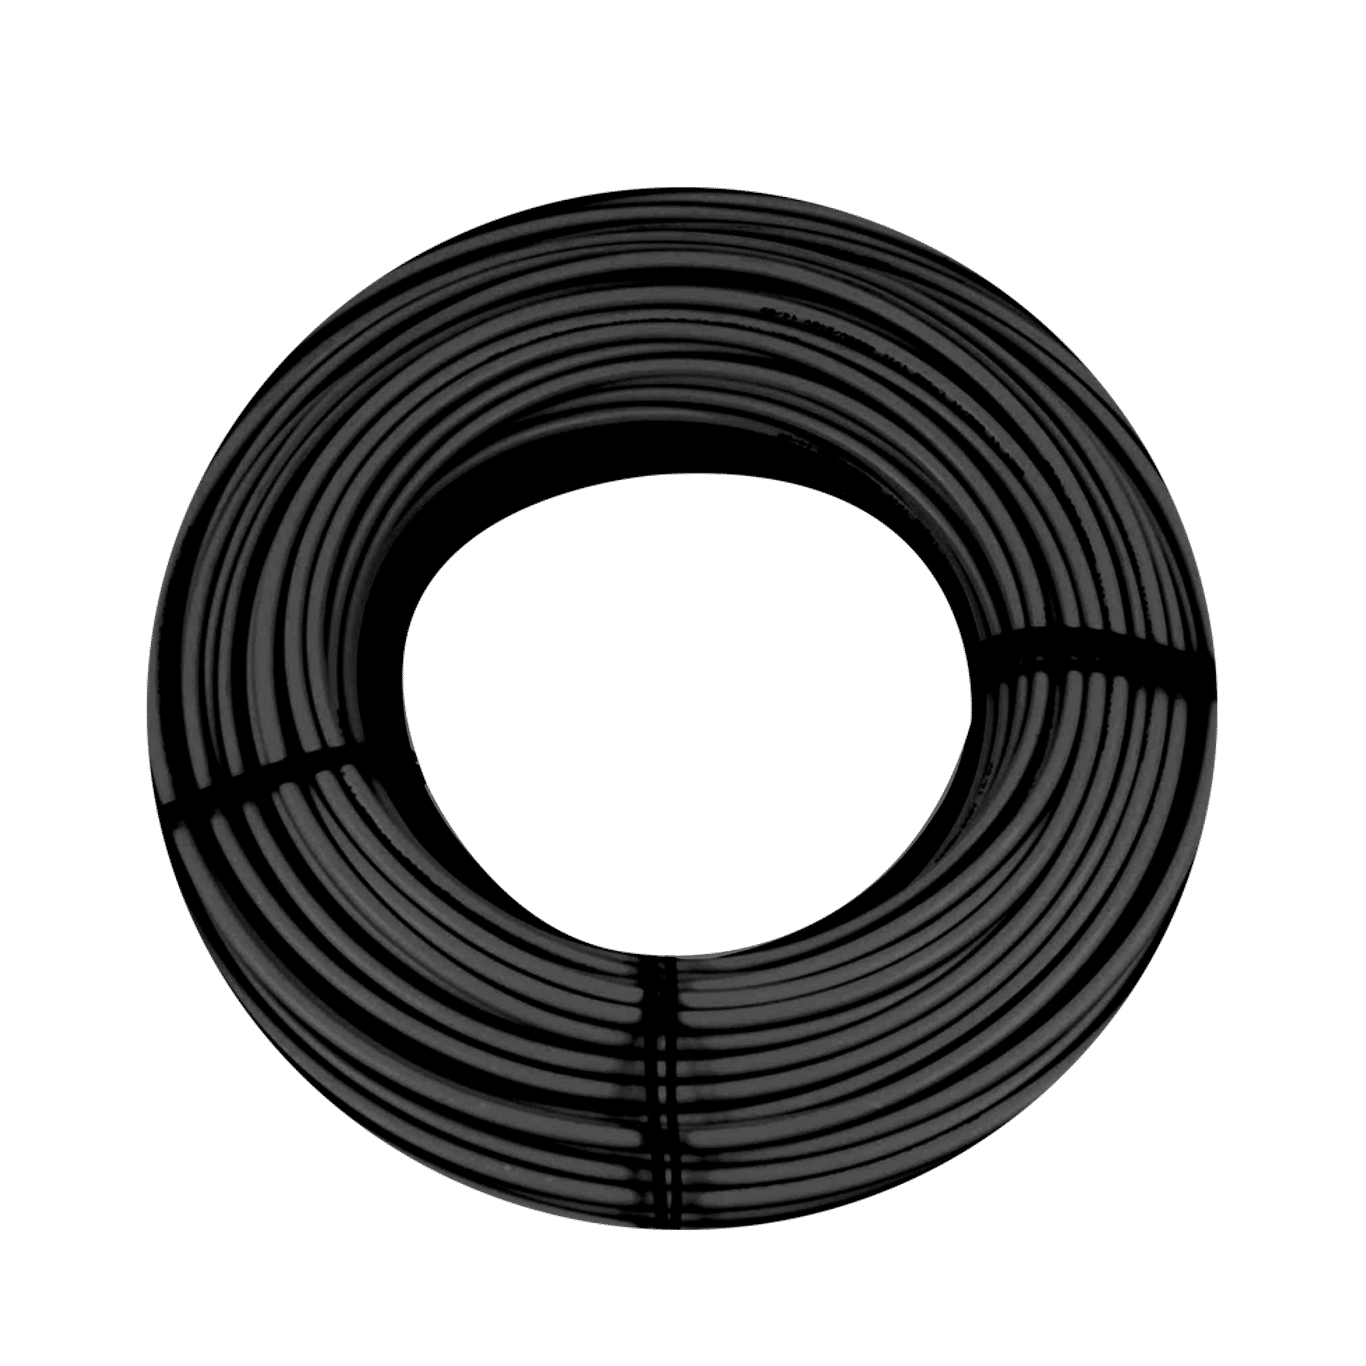 Roof and Gutter De-icing cable